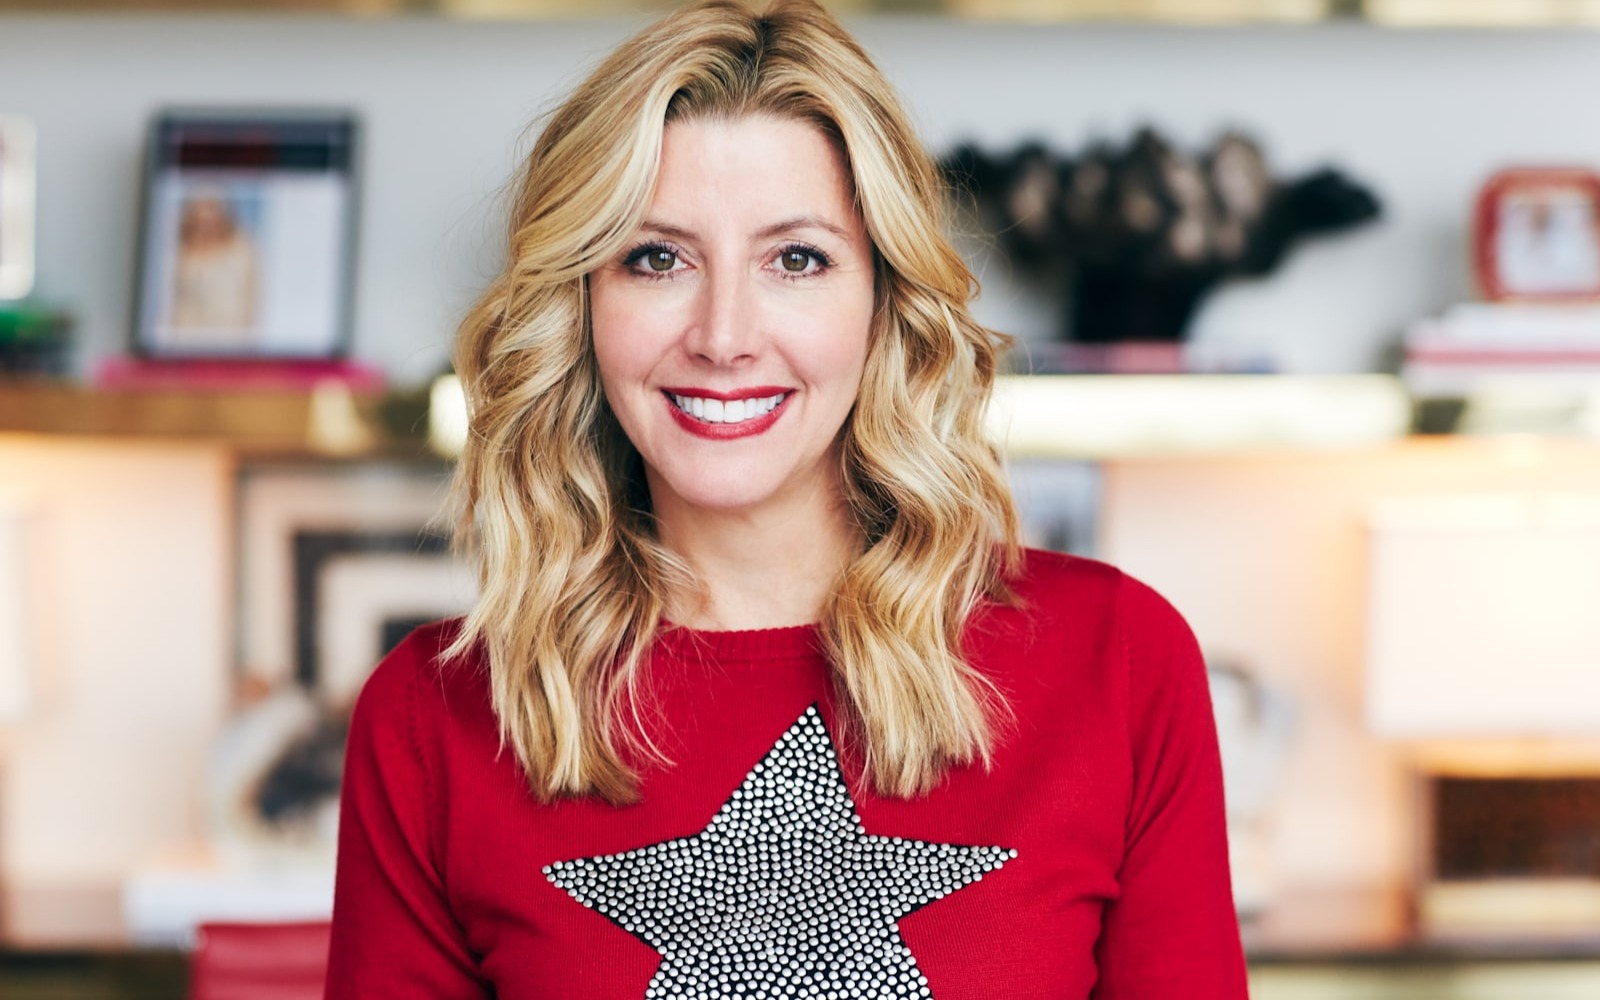 Spanx Founder Sara Blakely Reflects on Her 'Unusual' Business Journey, the  Power of Intuition and the Importance of Paying It Forward